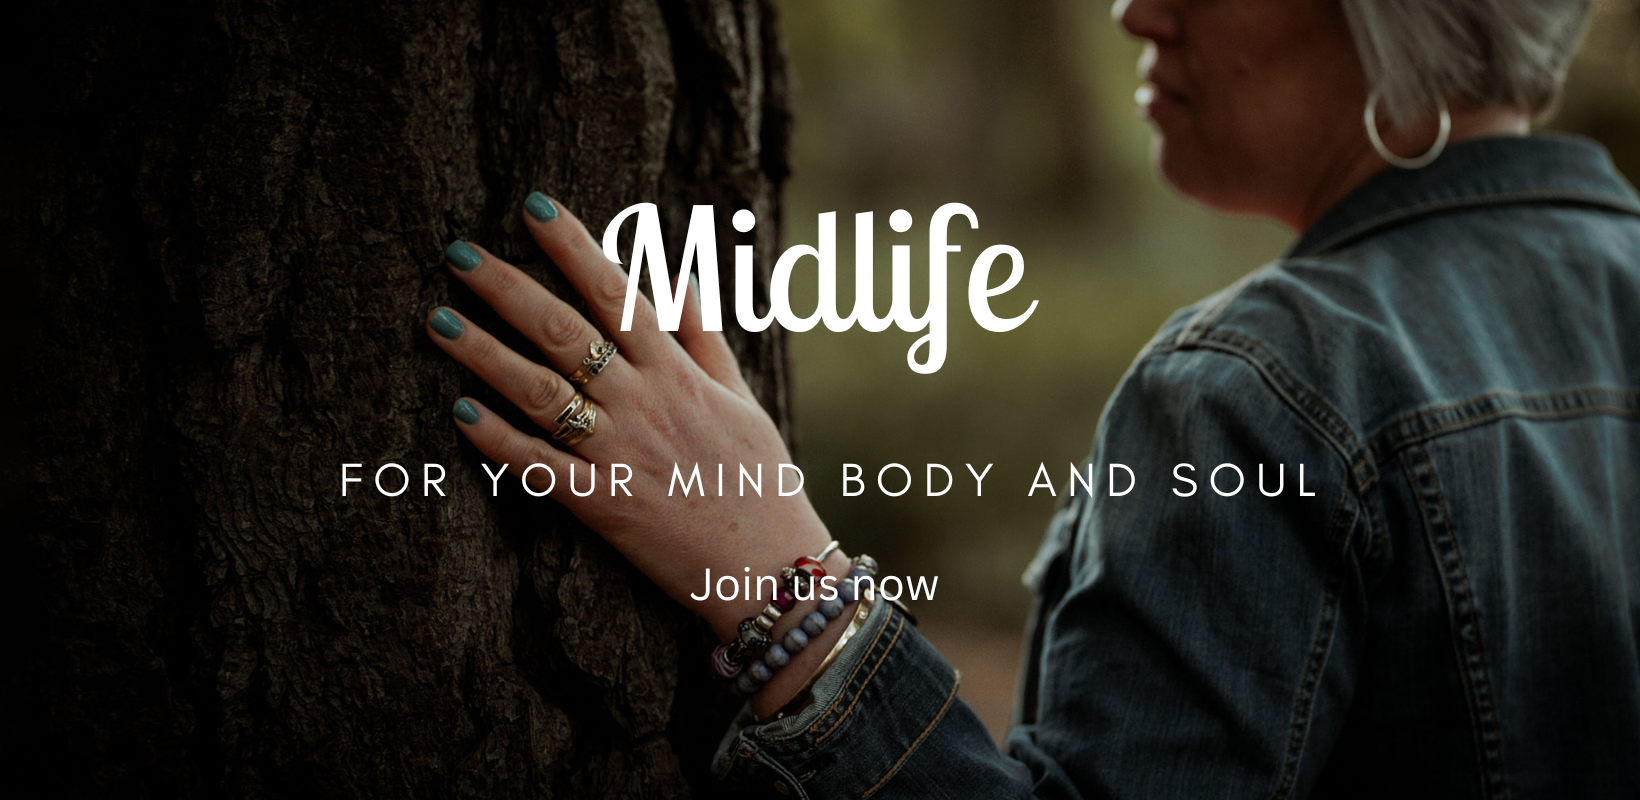 Midlife for mind body and soul<br />
